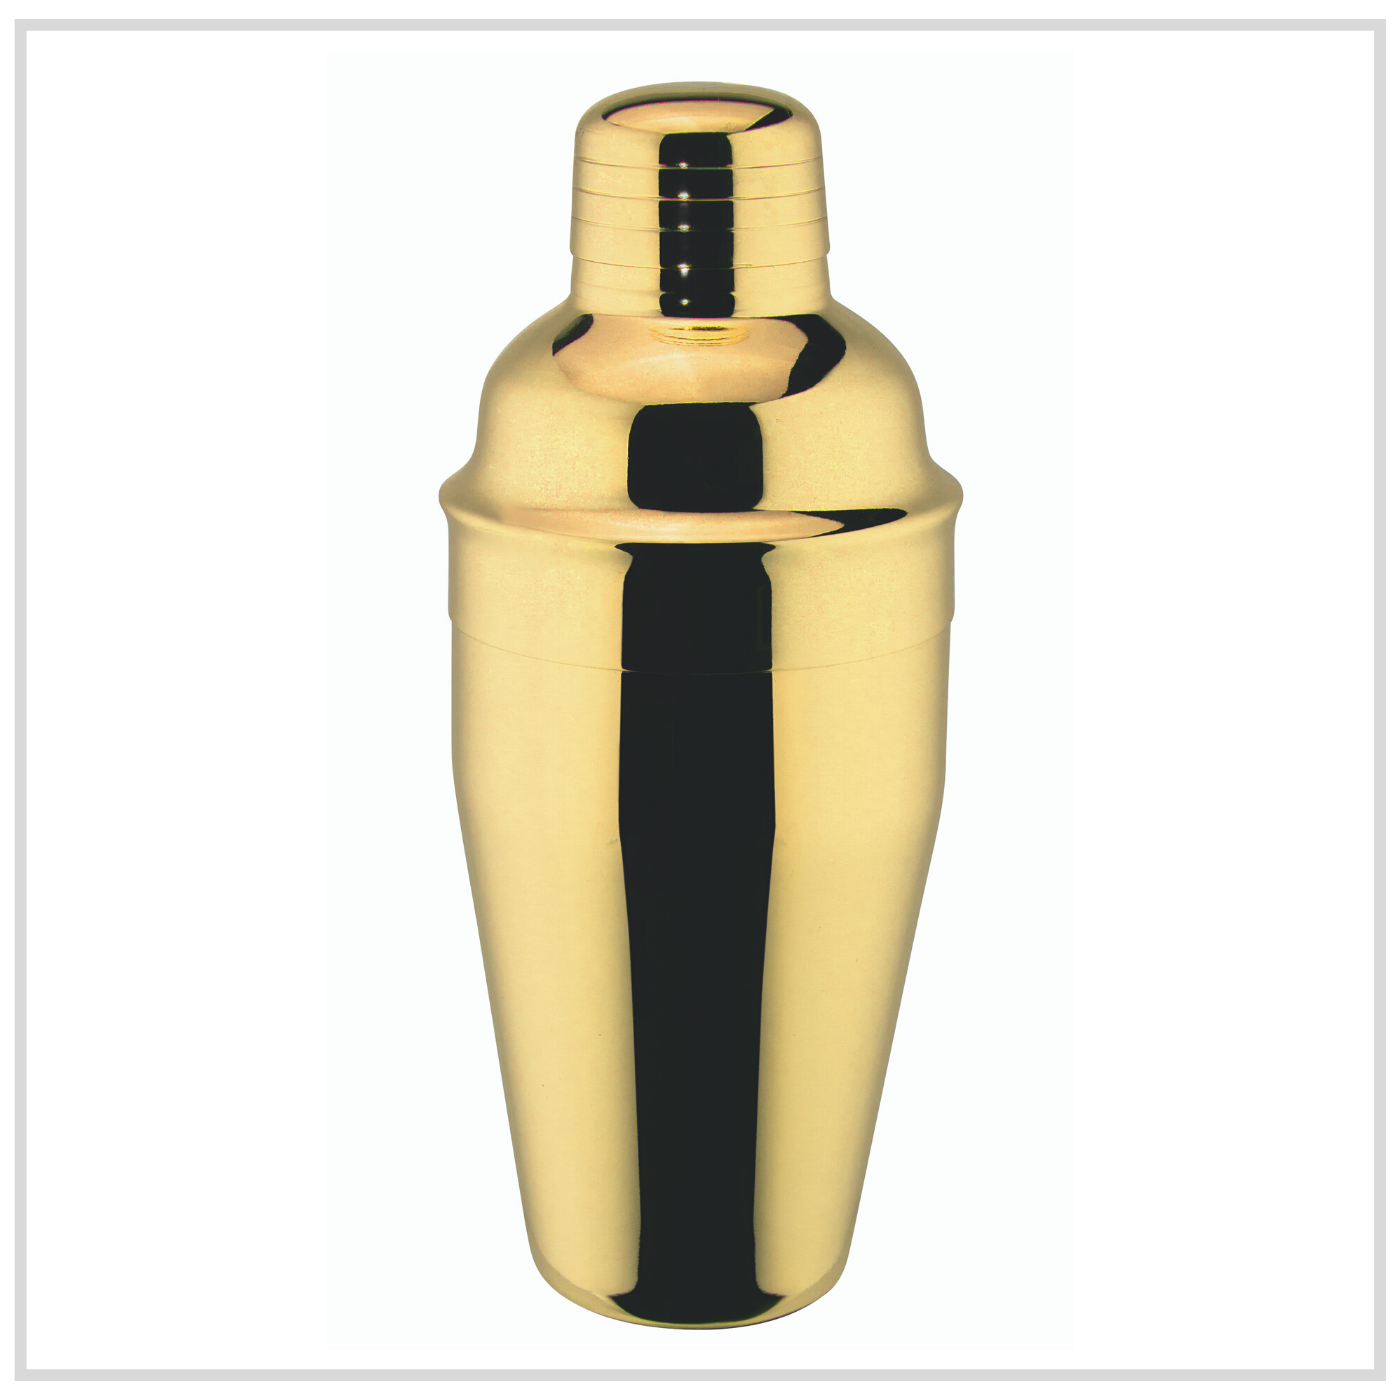 Ilsa Stainless Steel Cocktail Shaker - Gold - 500ml